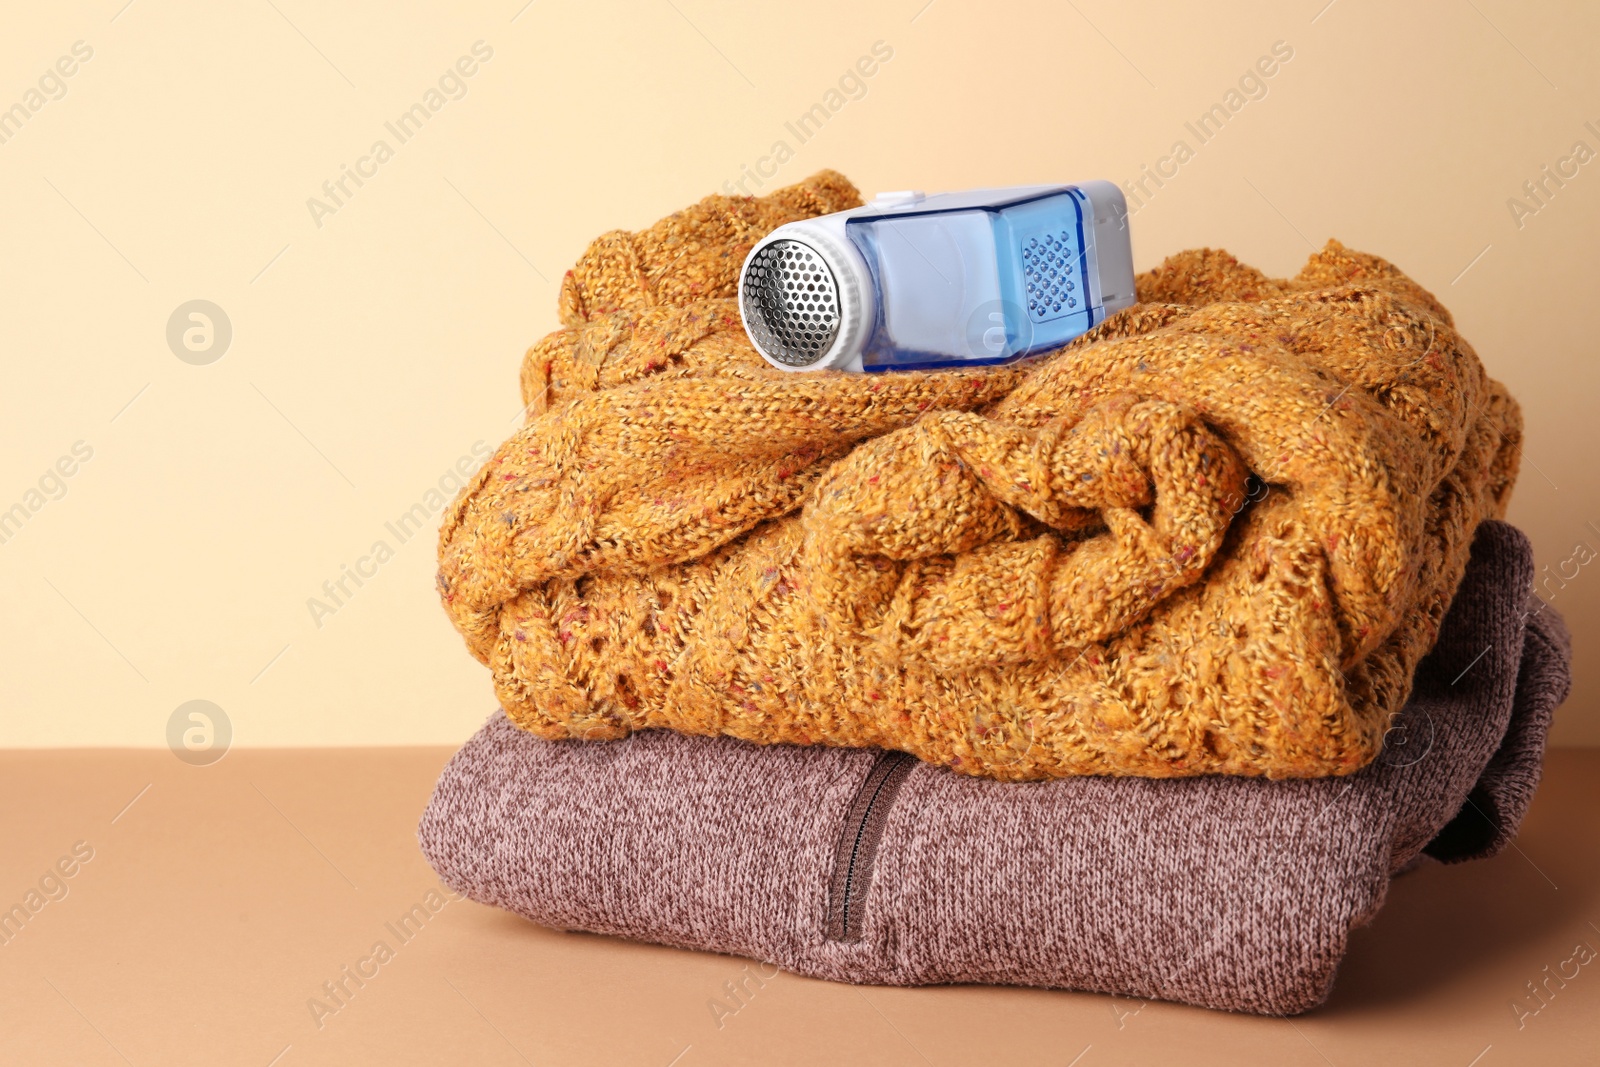 Photo of Modern fabric shaver and knitted clothes on brown table against beige wall, space for text